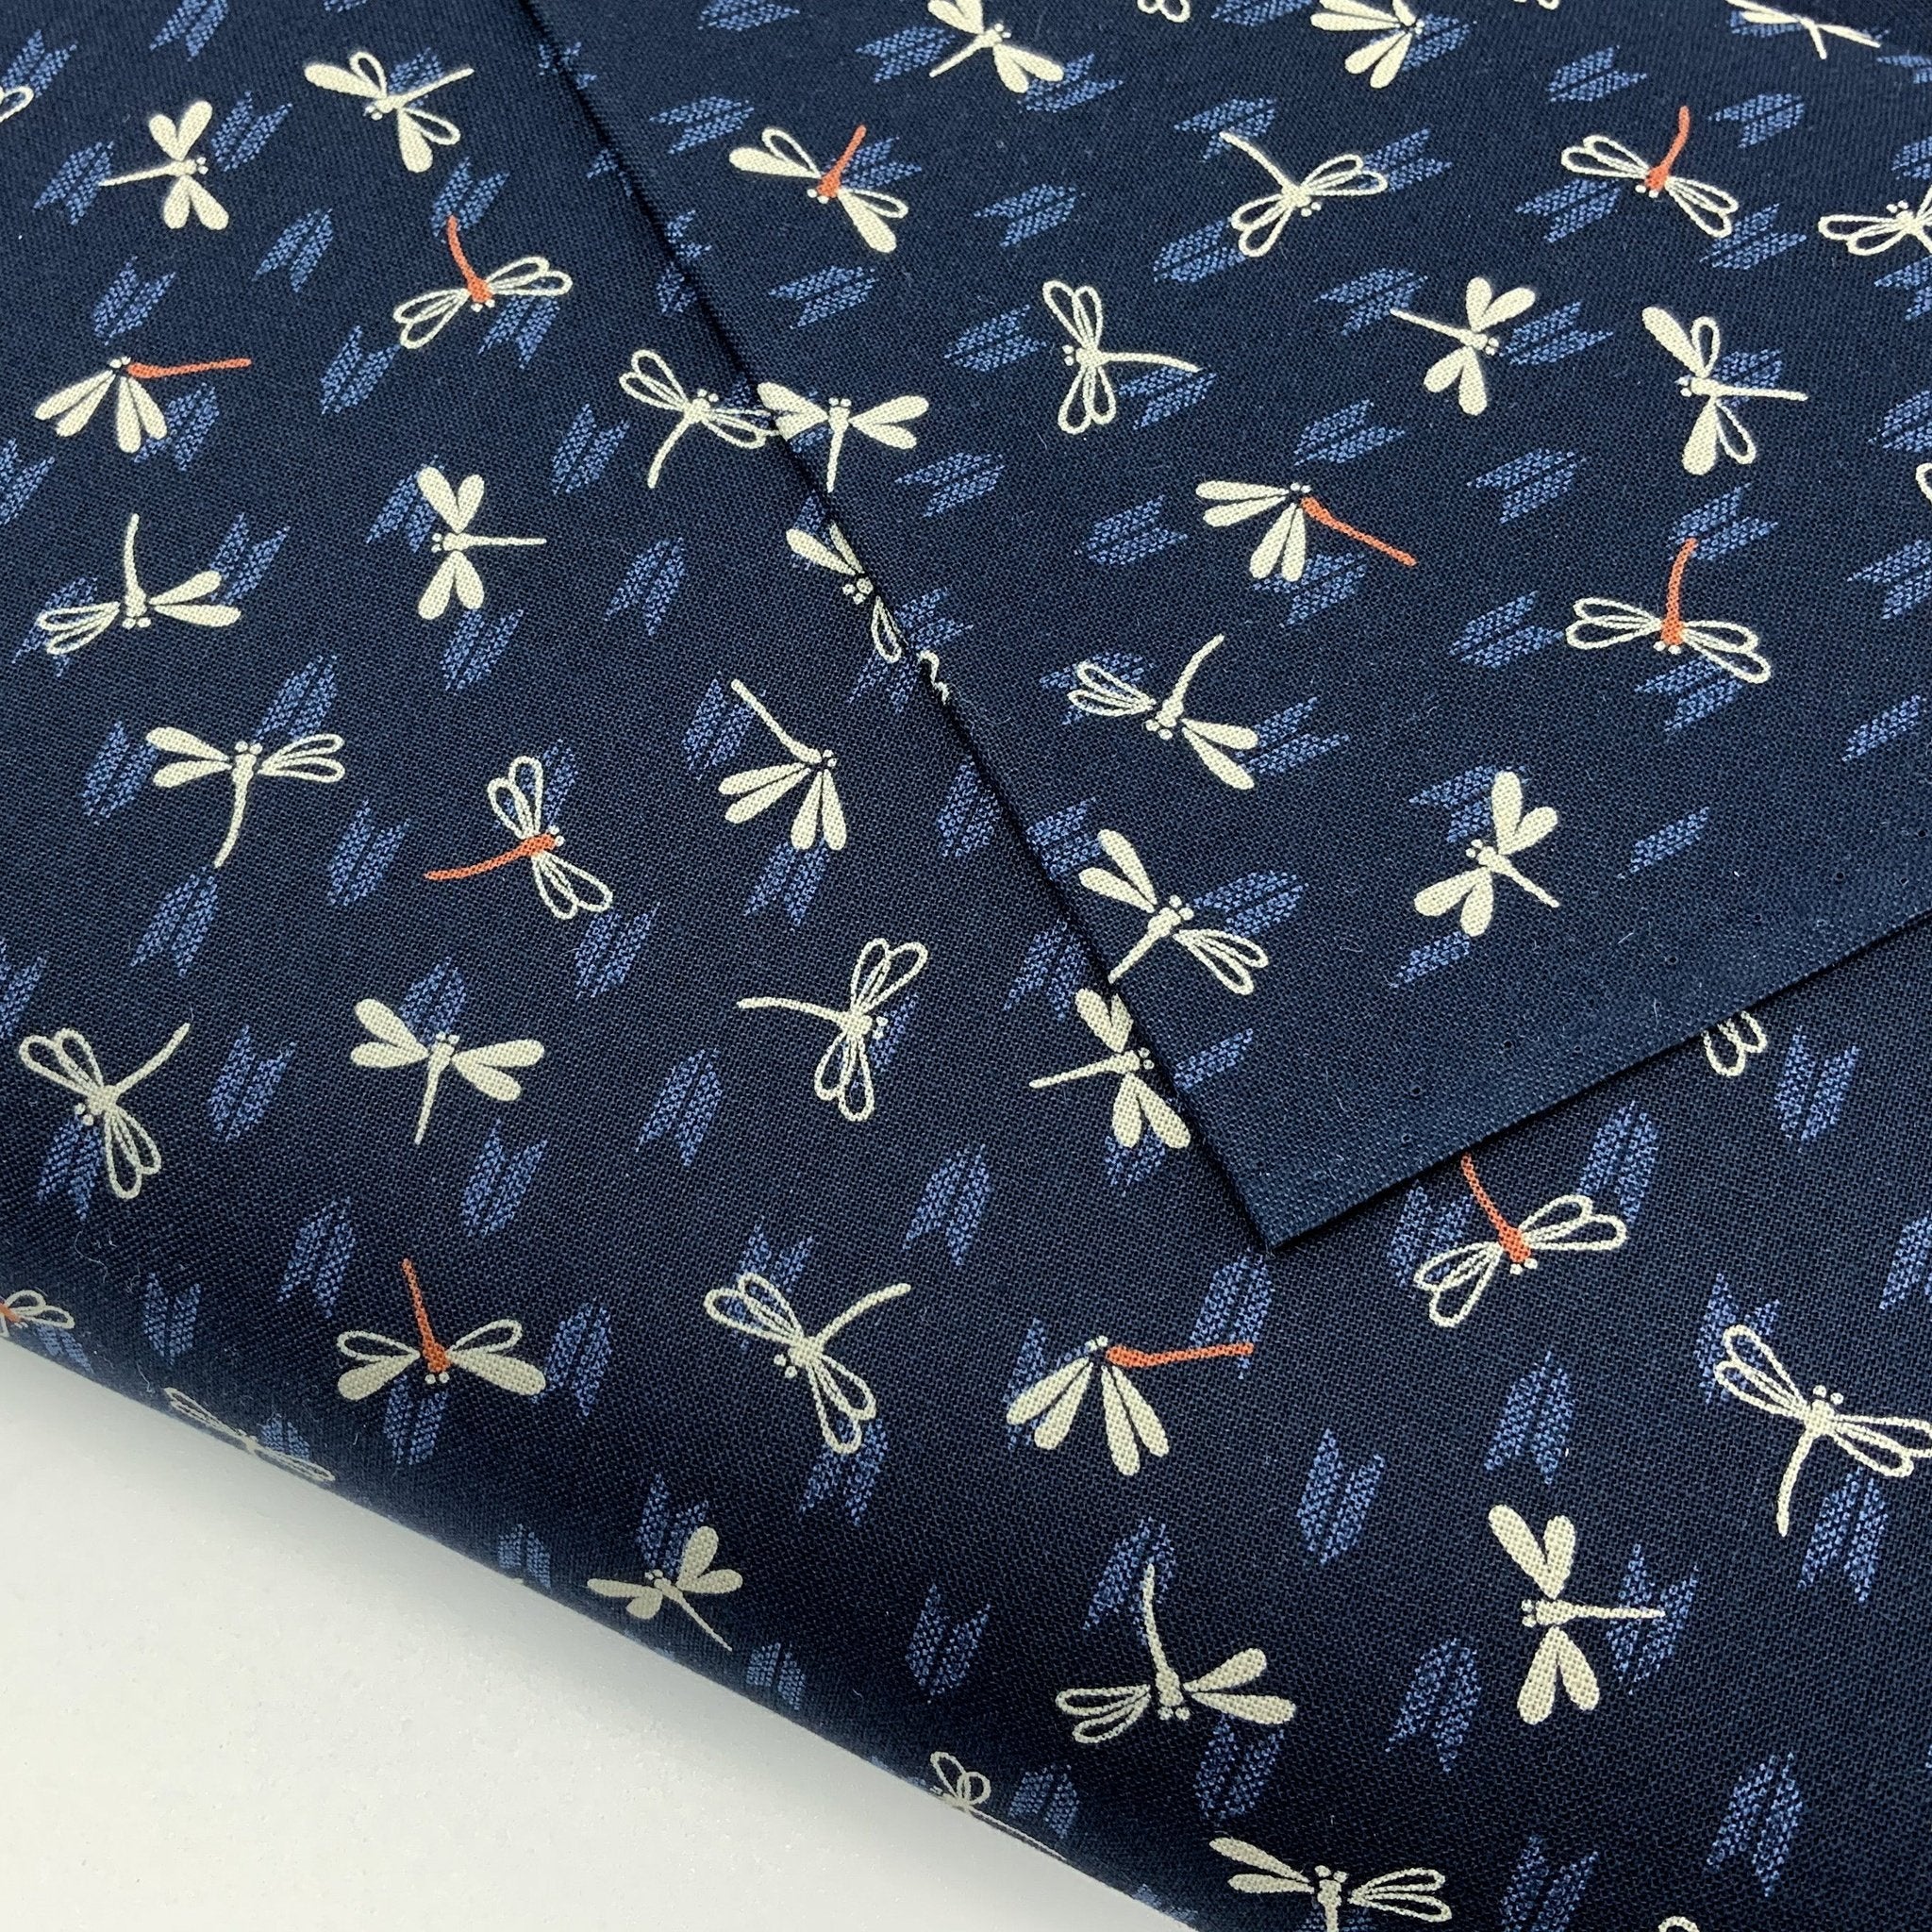 Japanese Cotton Sheeting Print - Dragonflies with Arrows Navy